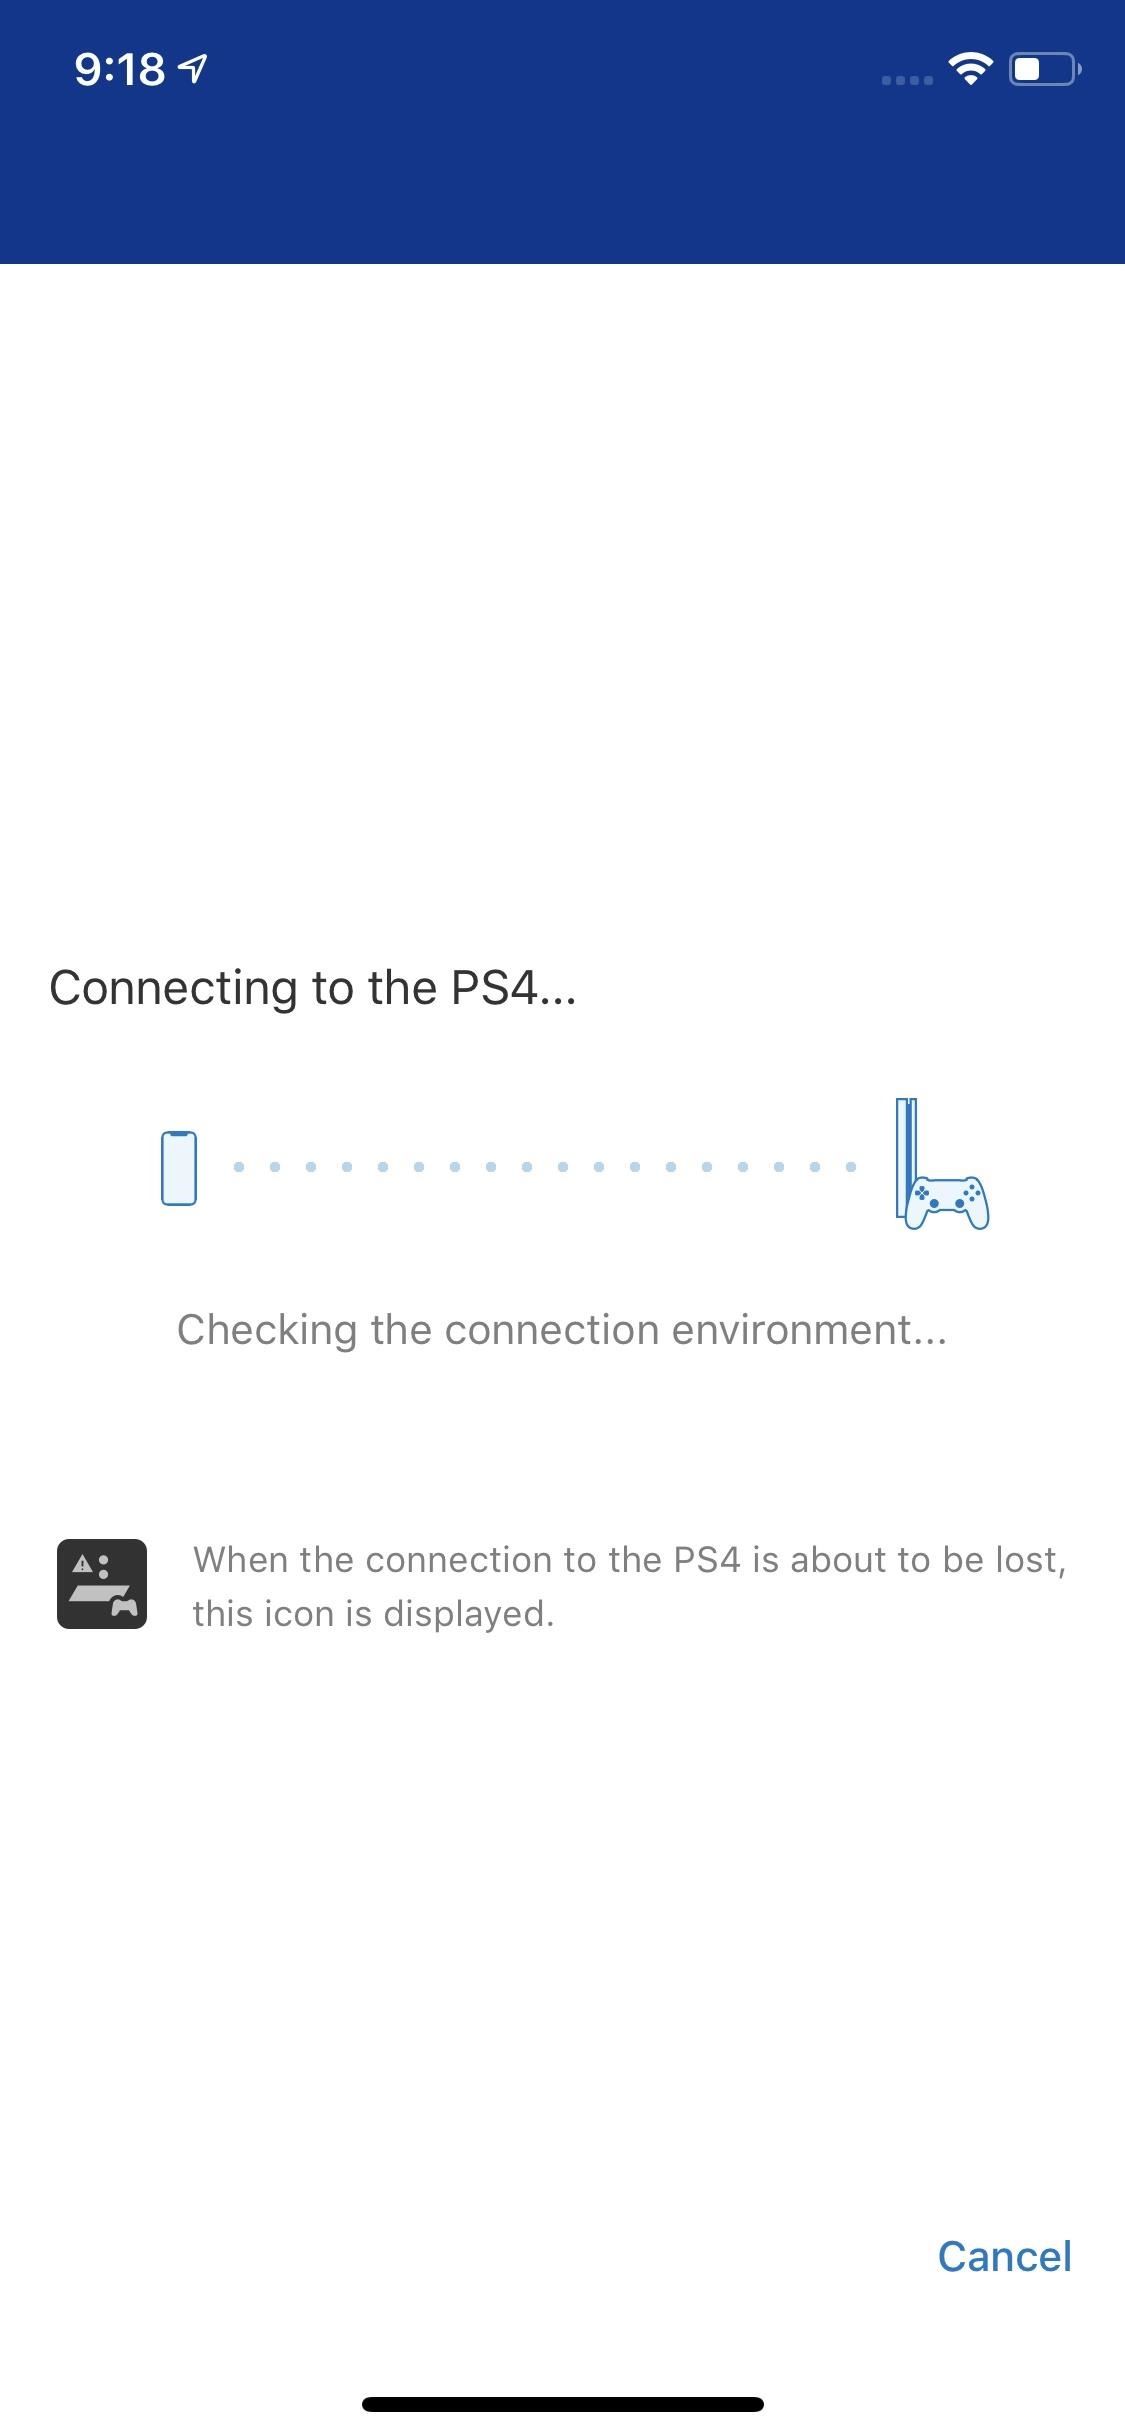 How to Play Your Own PS4 Games on Your iPhone with Sony's New Remote Play App